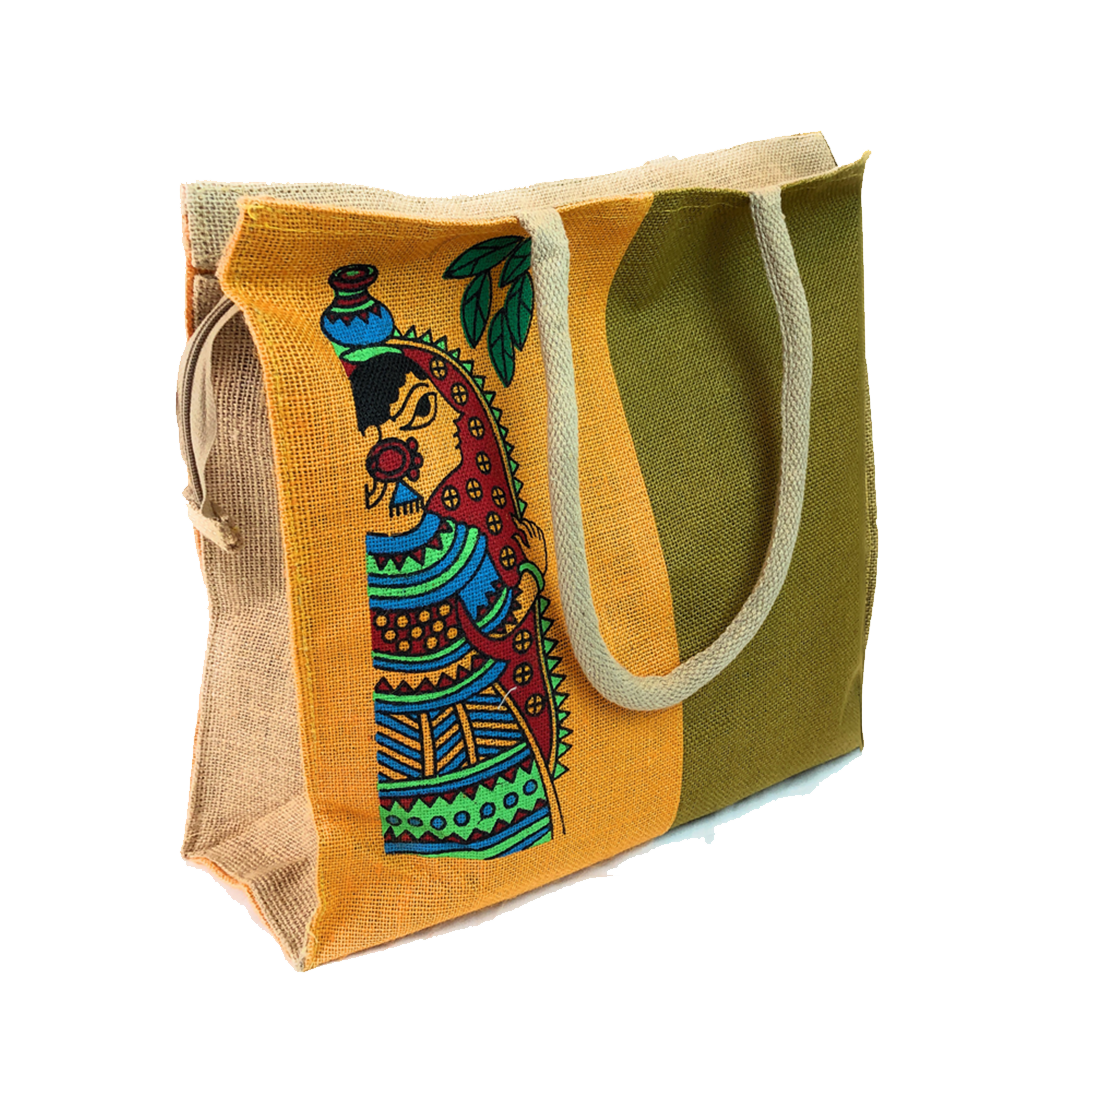 Wholesale Jute Bags: Sustainable Fashion for Every Occasion | by Cotton Bag  Factory | Medium